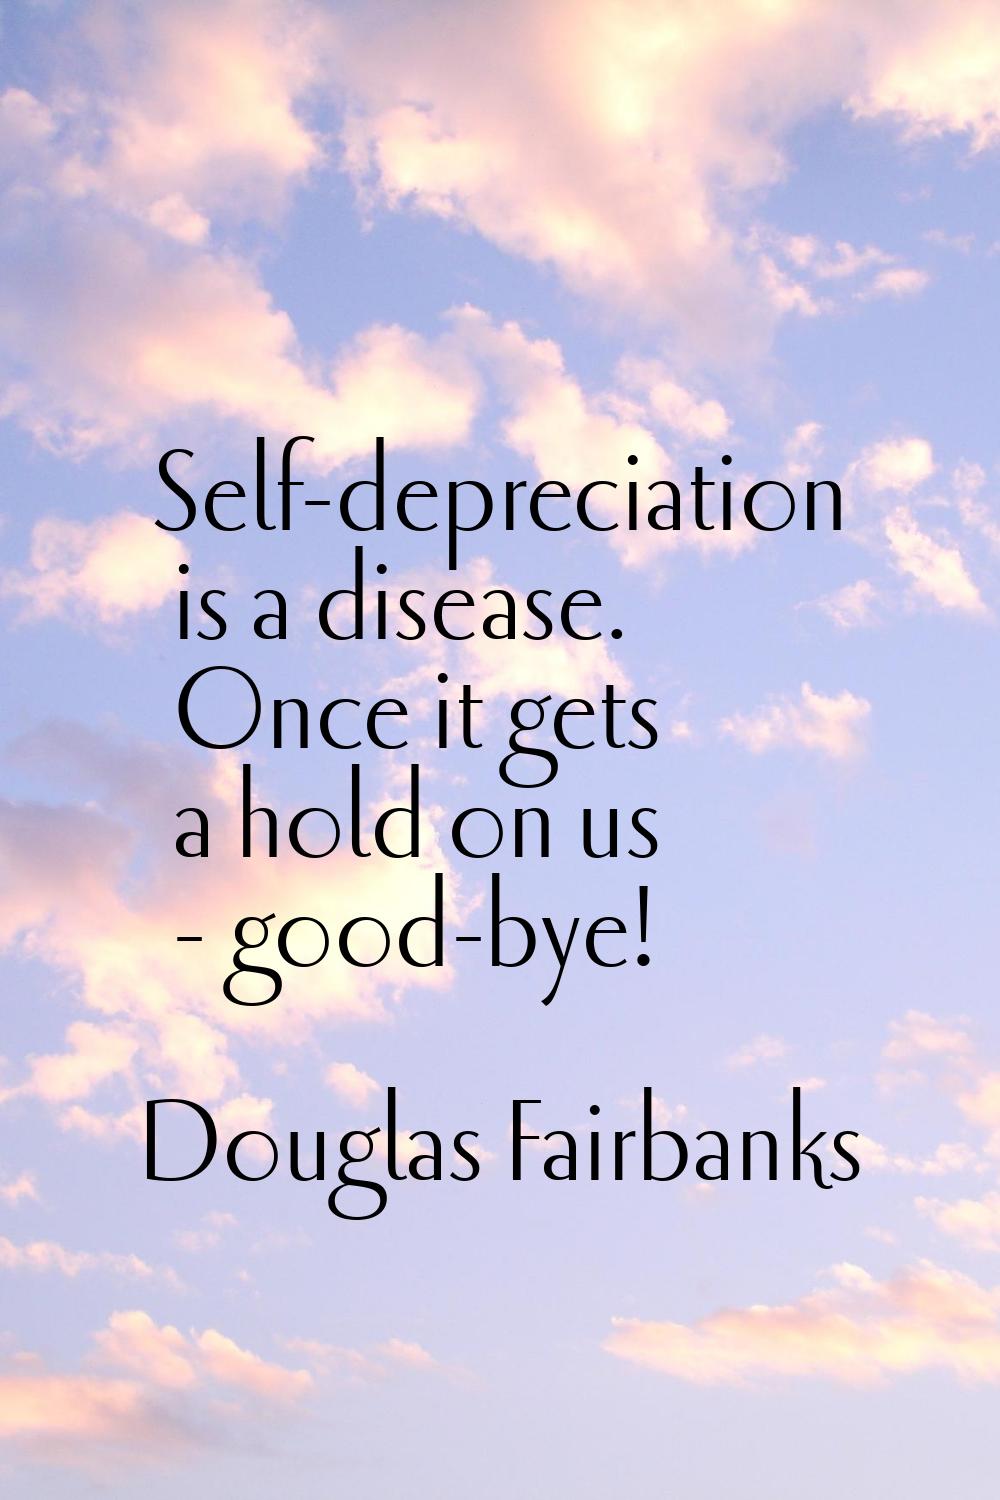 Self-depreciation is a disease. Once it gets a hold on us - good-bye!